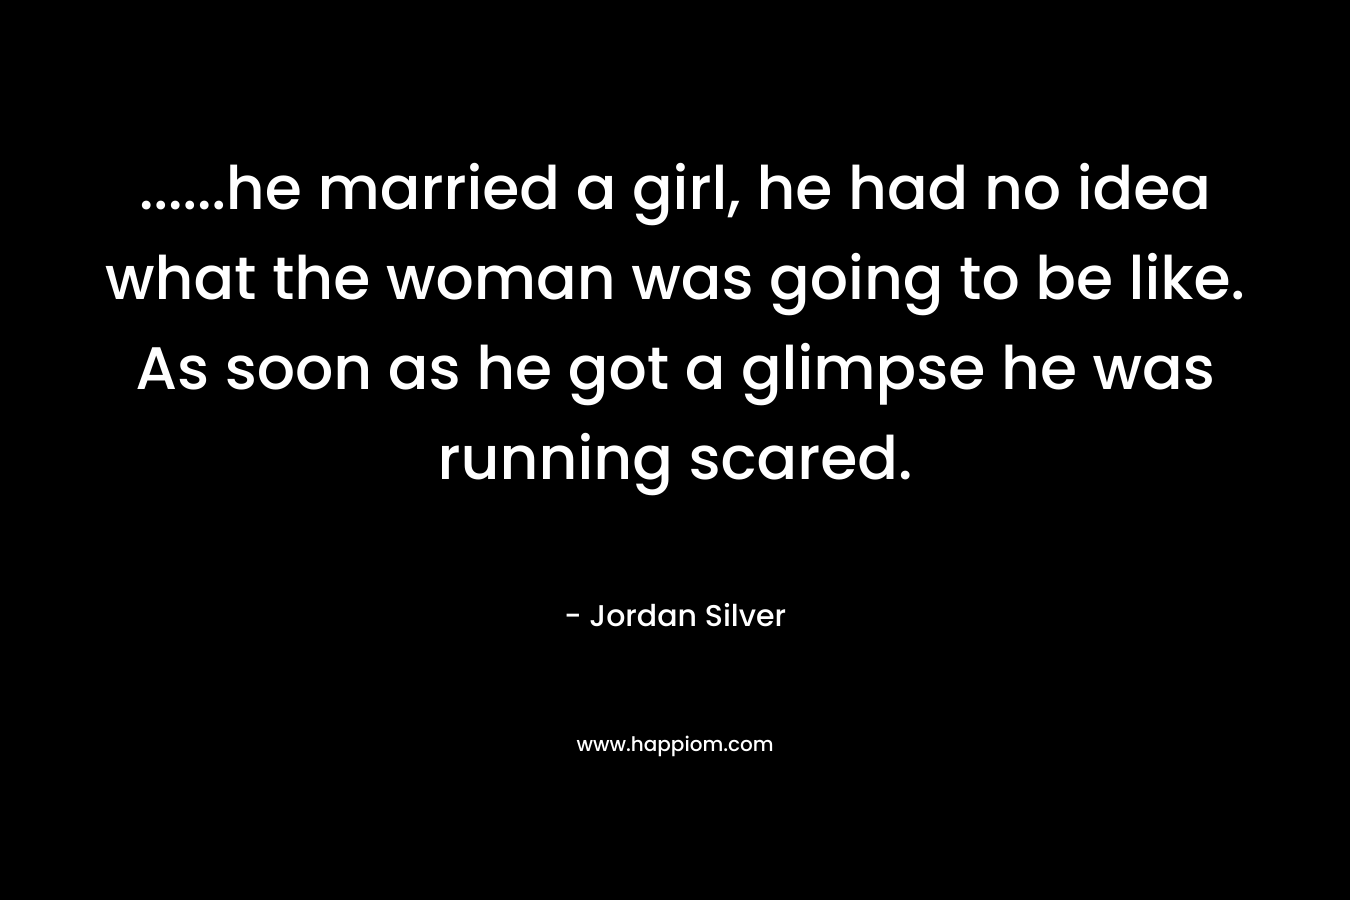 ......he married a girl, he had no idea what the woman was going to be like. As soon as he got a glimpse he was running scared.